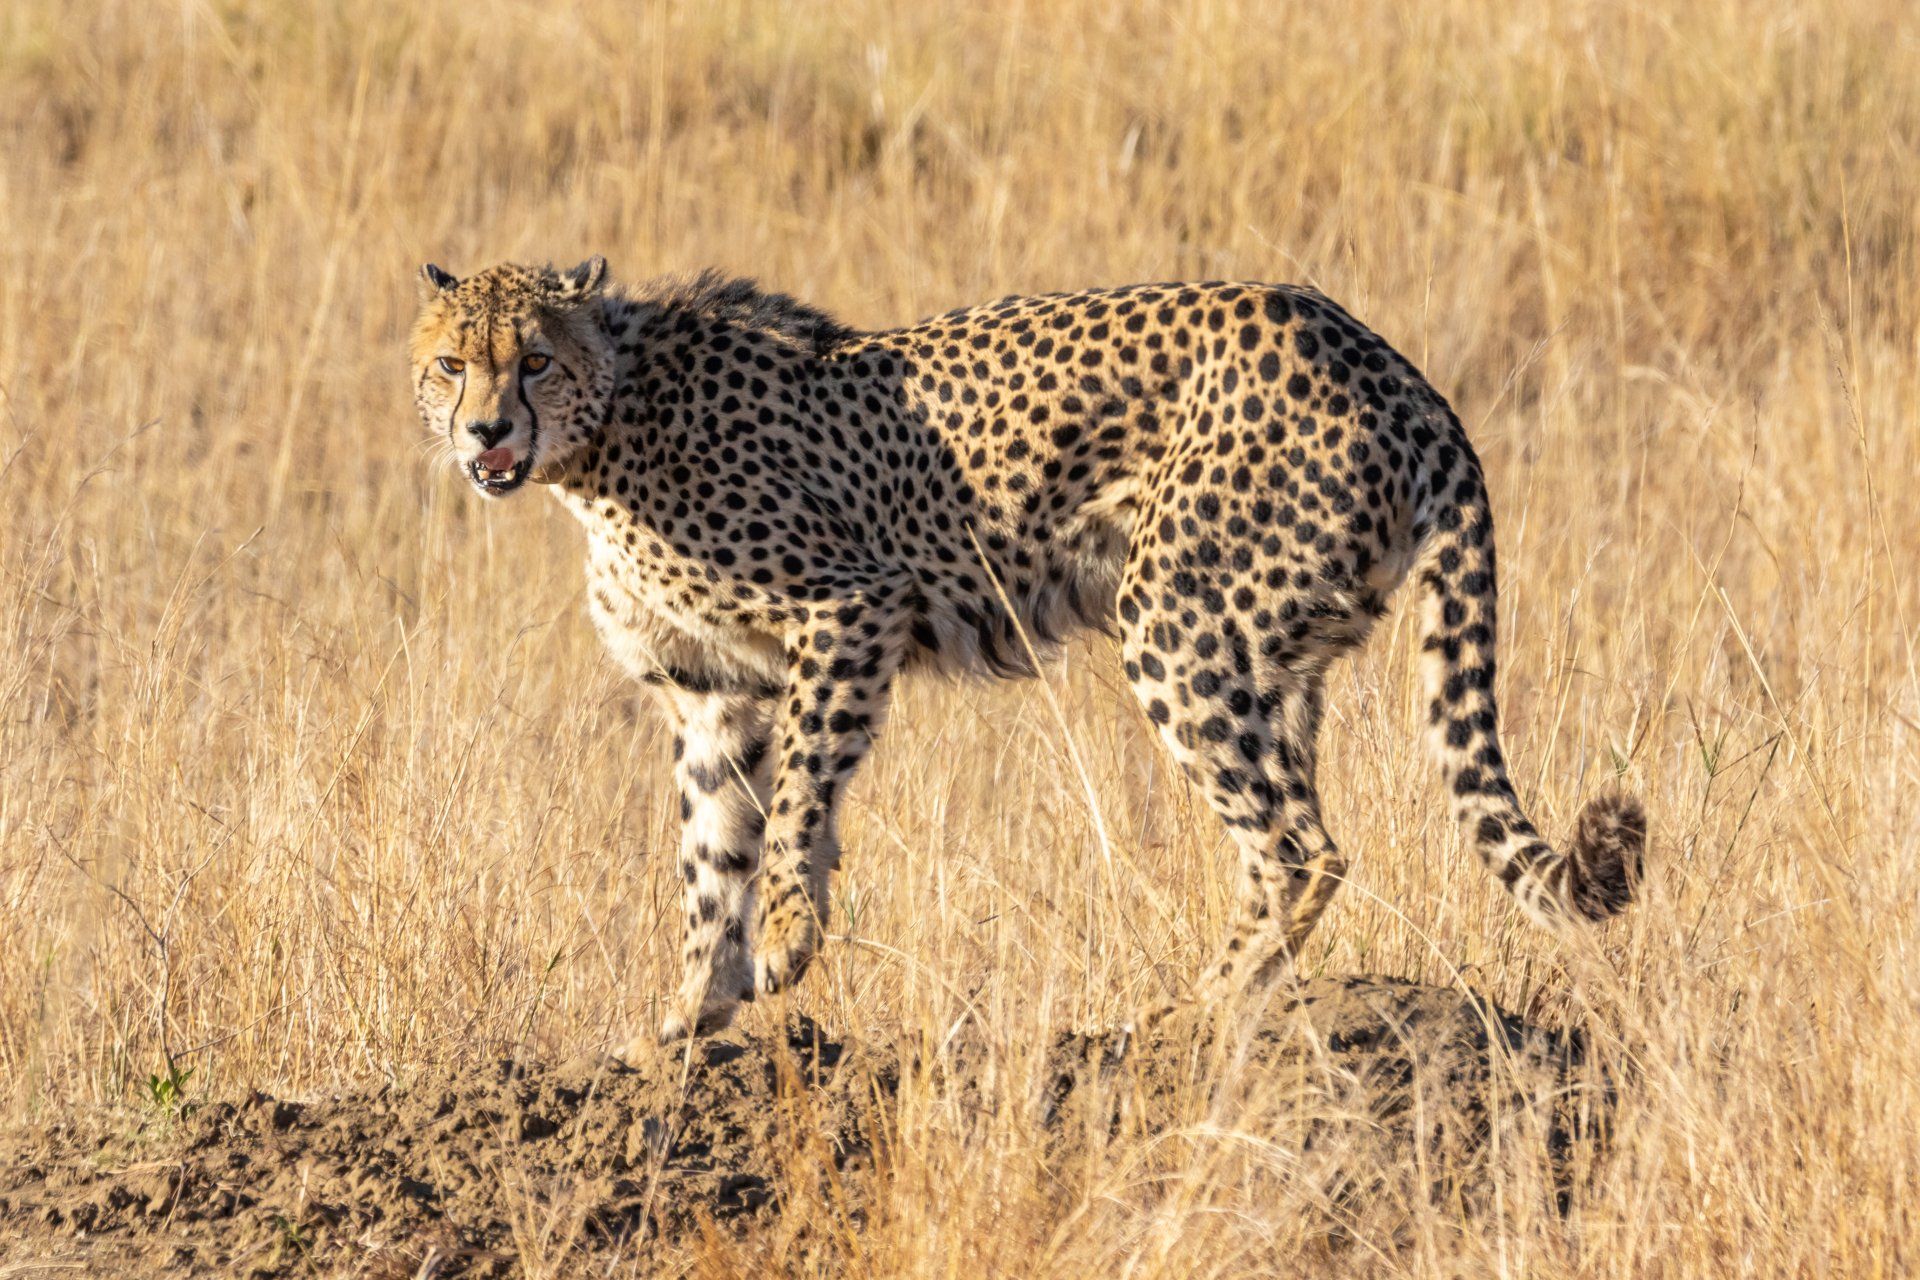 a cheetah standing in a field with its mouth open